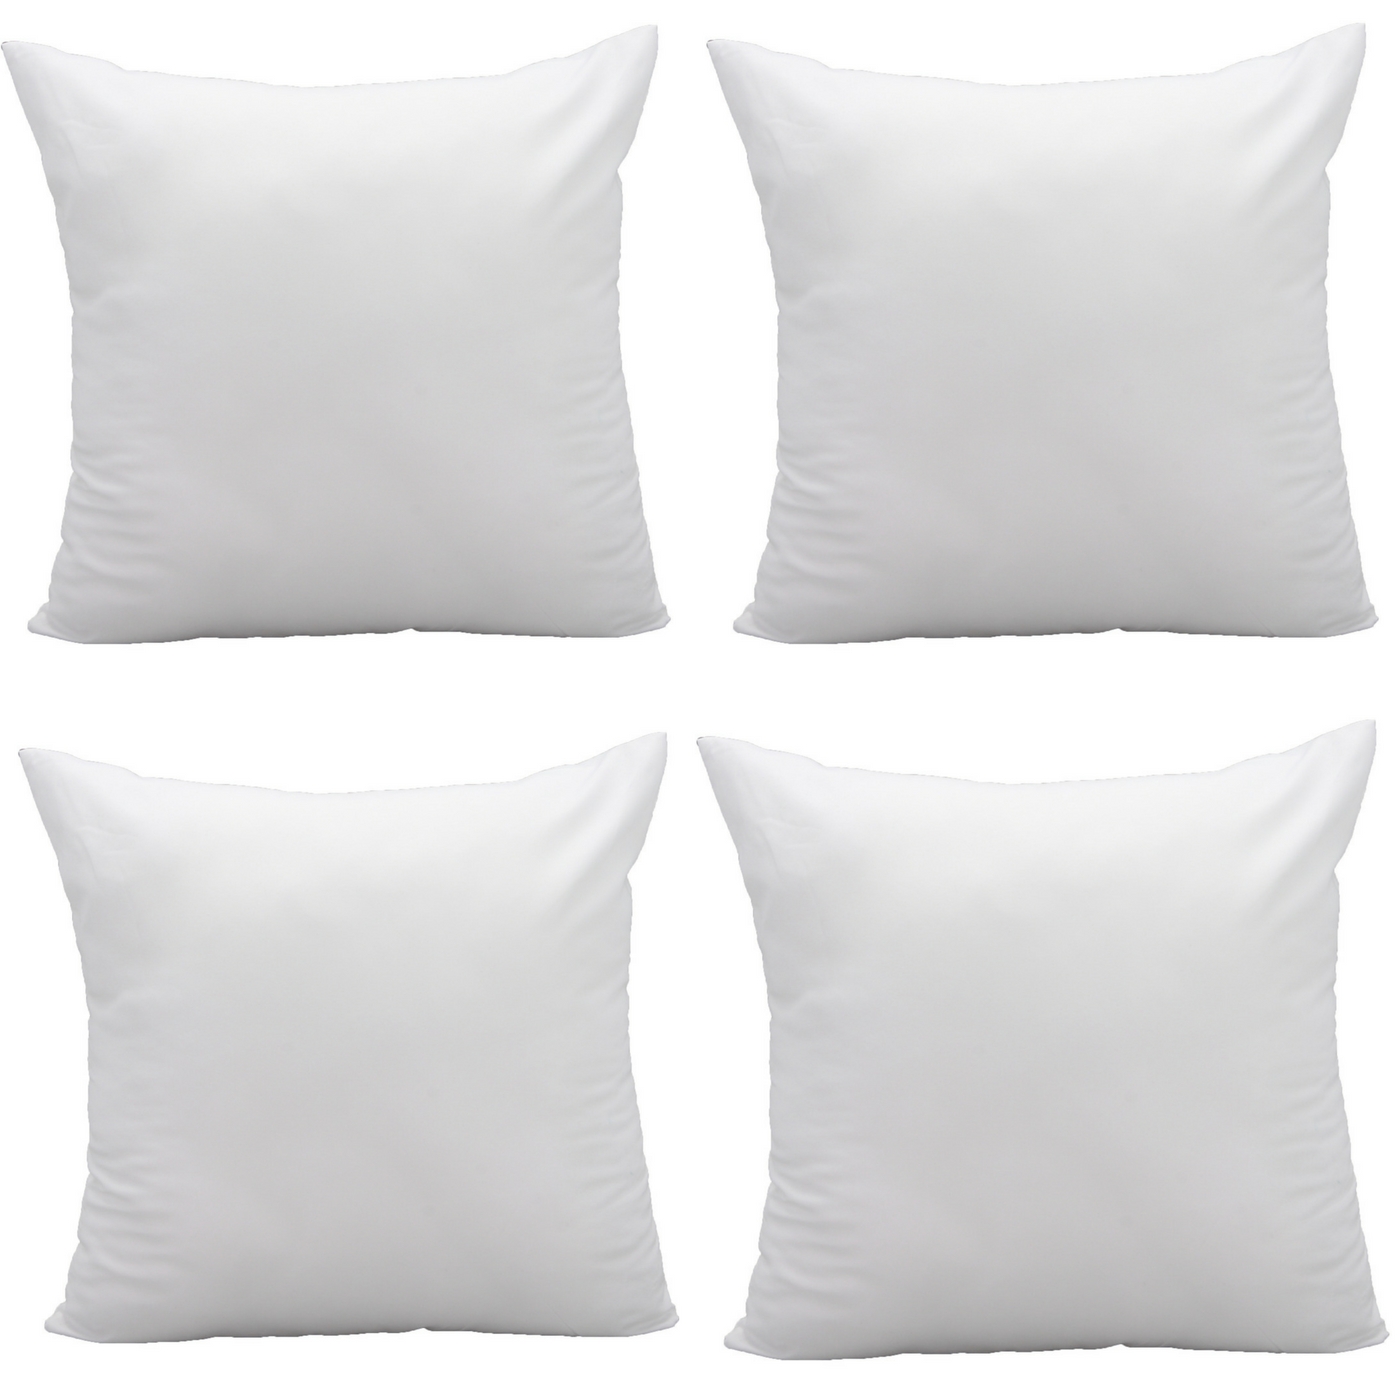 WHERE TO BUY THE BEST PILLOW INSERTS – Boho Pillow